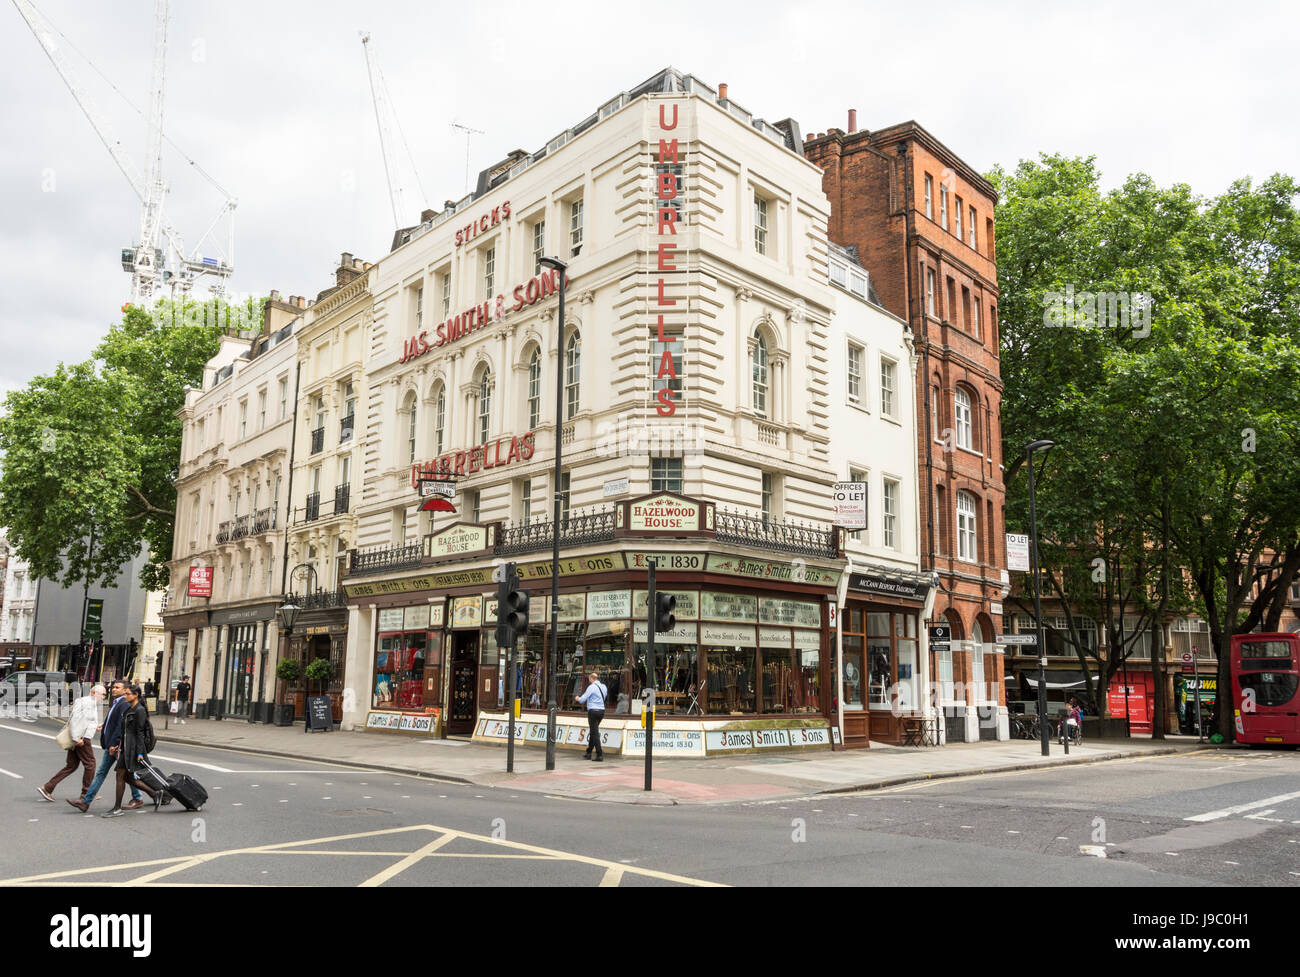 James Smith and Sons Umbrella Shop in Holborn, London, UK Stock Photo